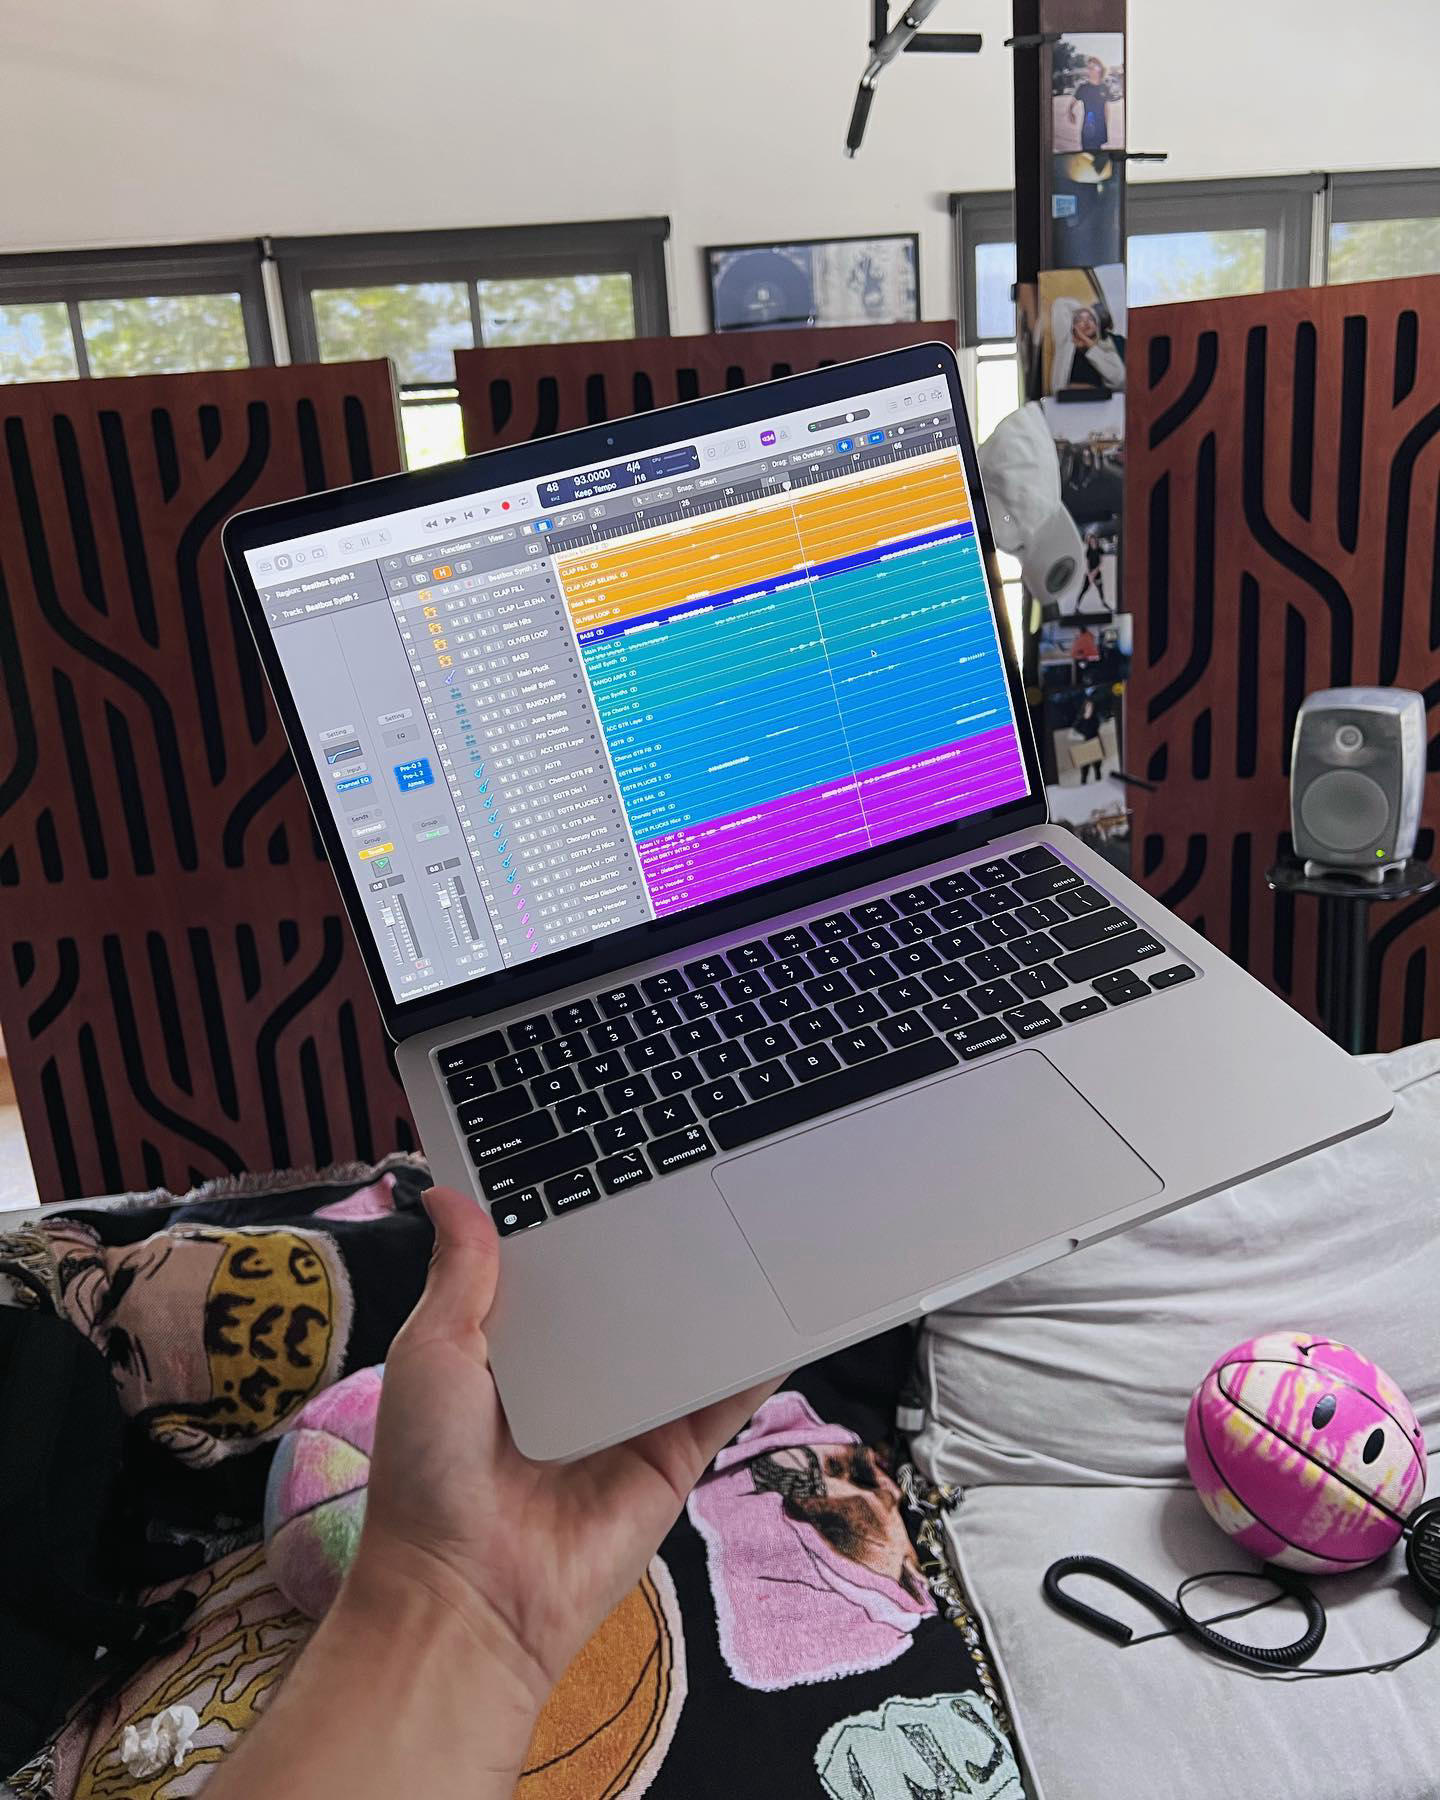 Jonathan Morrison - hey #adamturleymusic your next atmos release is in the hands of the base MacBook